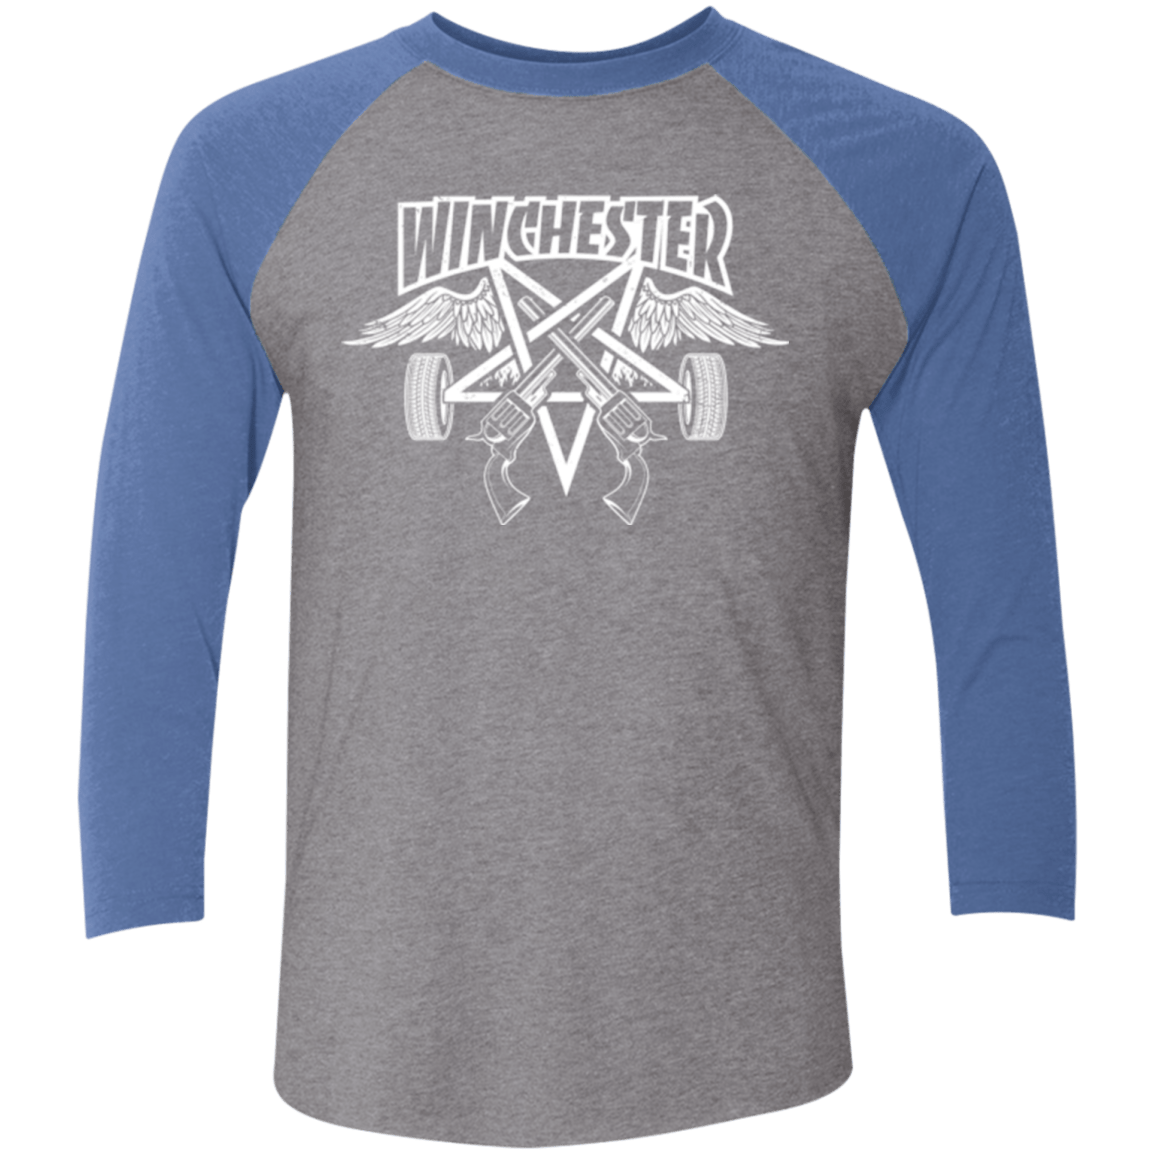 T-Shirts Premium Heather/ Vintage Royal / X-Small WINCHESTER Men's Triblend 3/4 Sleeve